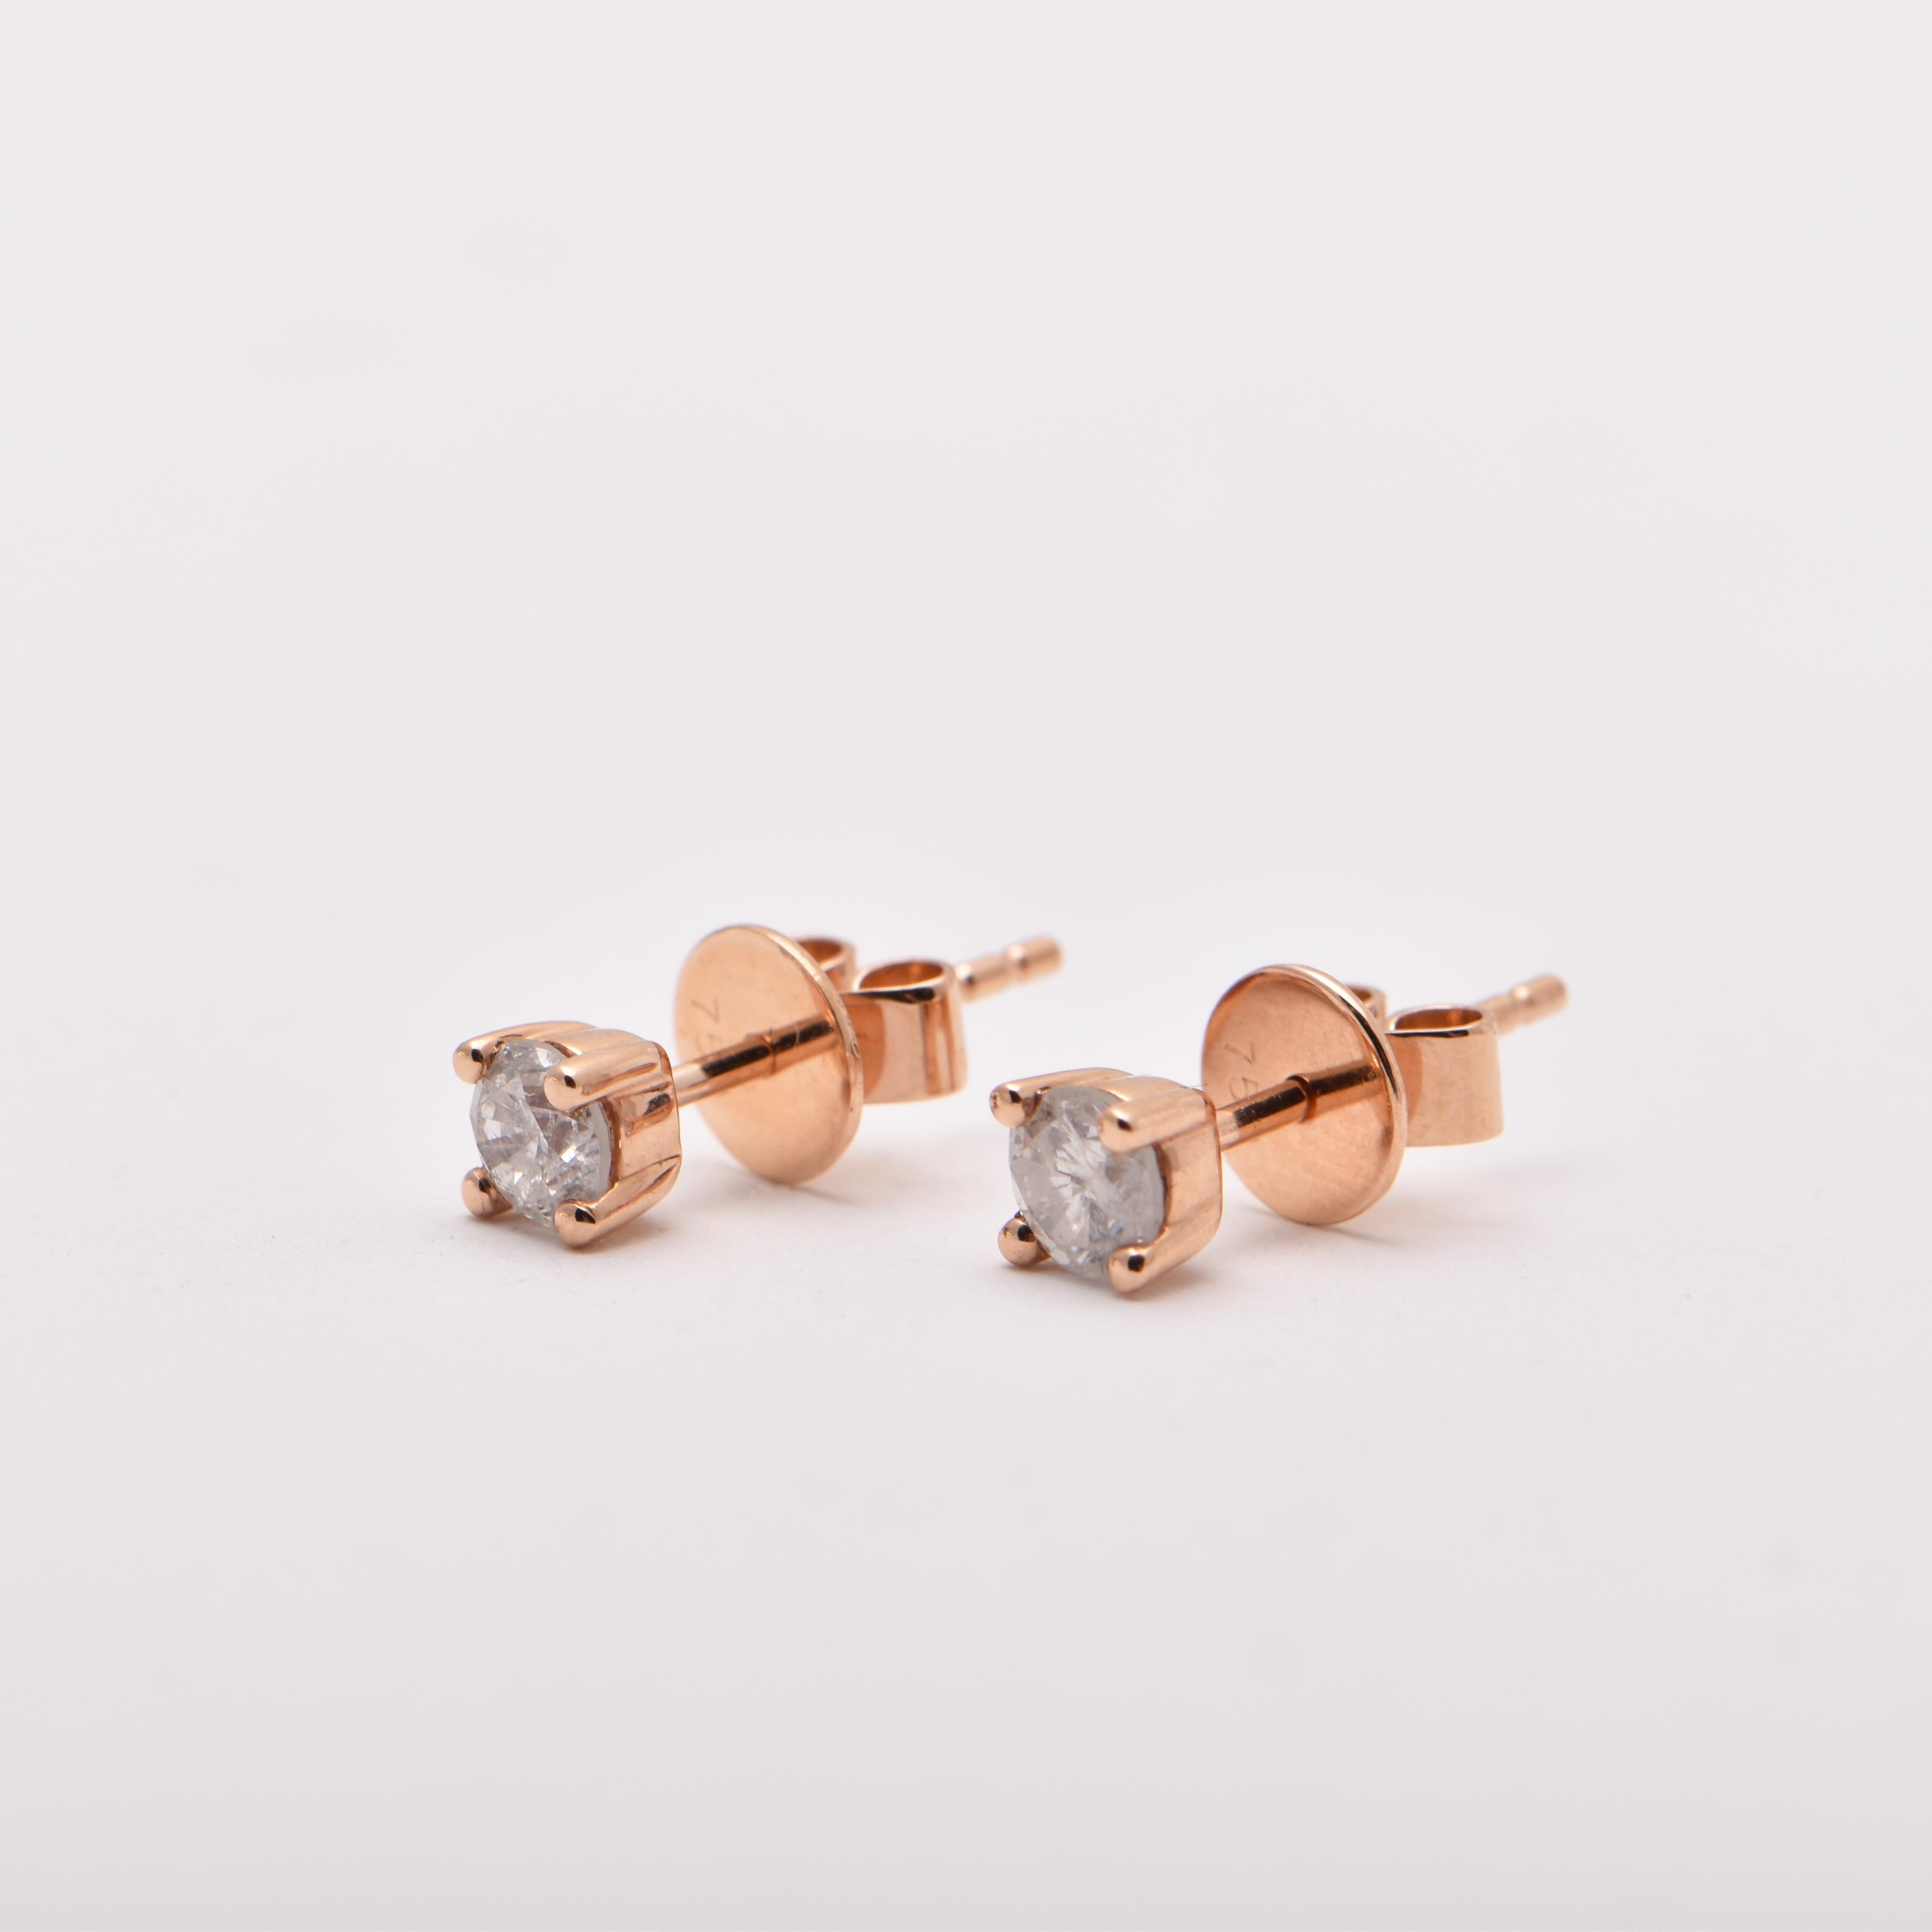 0.44 Carat Diamond Studs in 18 Carat Rose Gold by Cartmer Jewellery   

2 Diamonds totalling 0.44 carats   

FREE express postage usually 3-4 days Sydney to New York  
FREE international insurance  
by Cartmer Jewellery, The Dymocks Building, Sydney